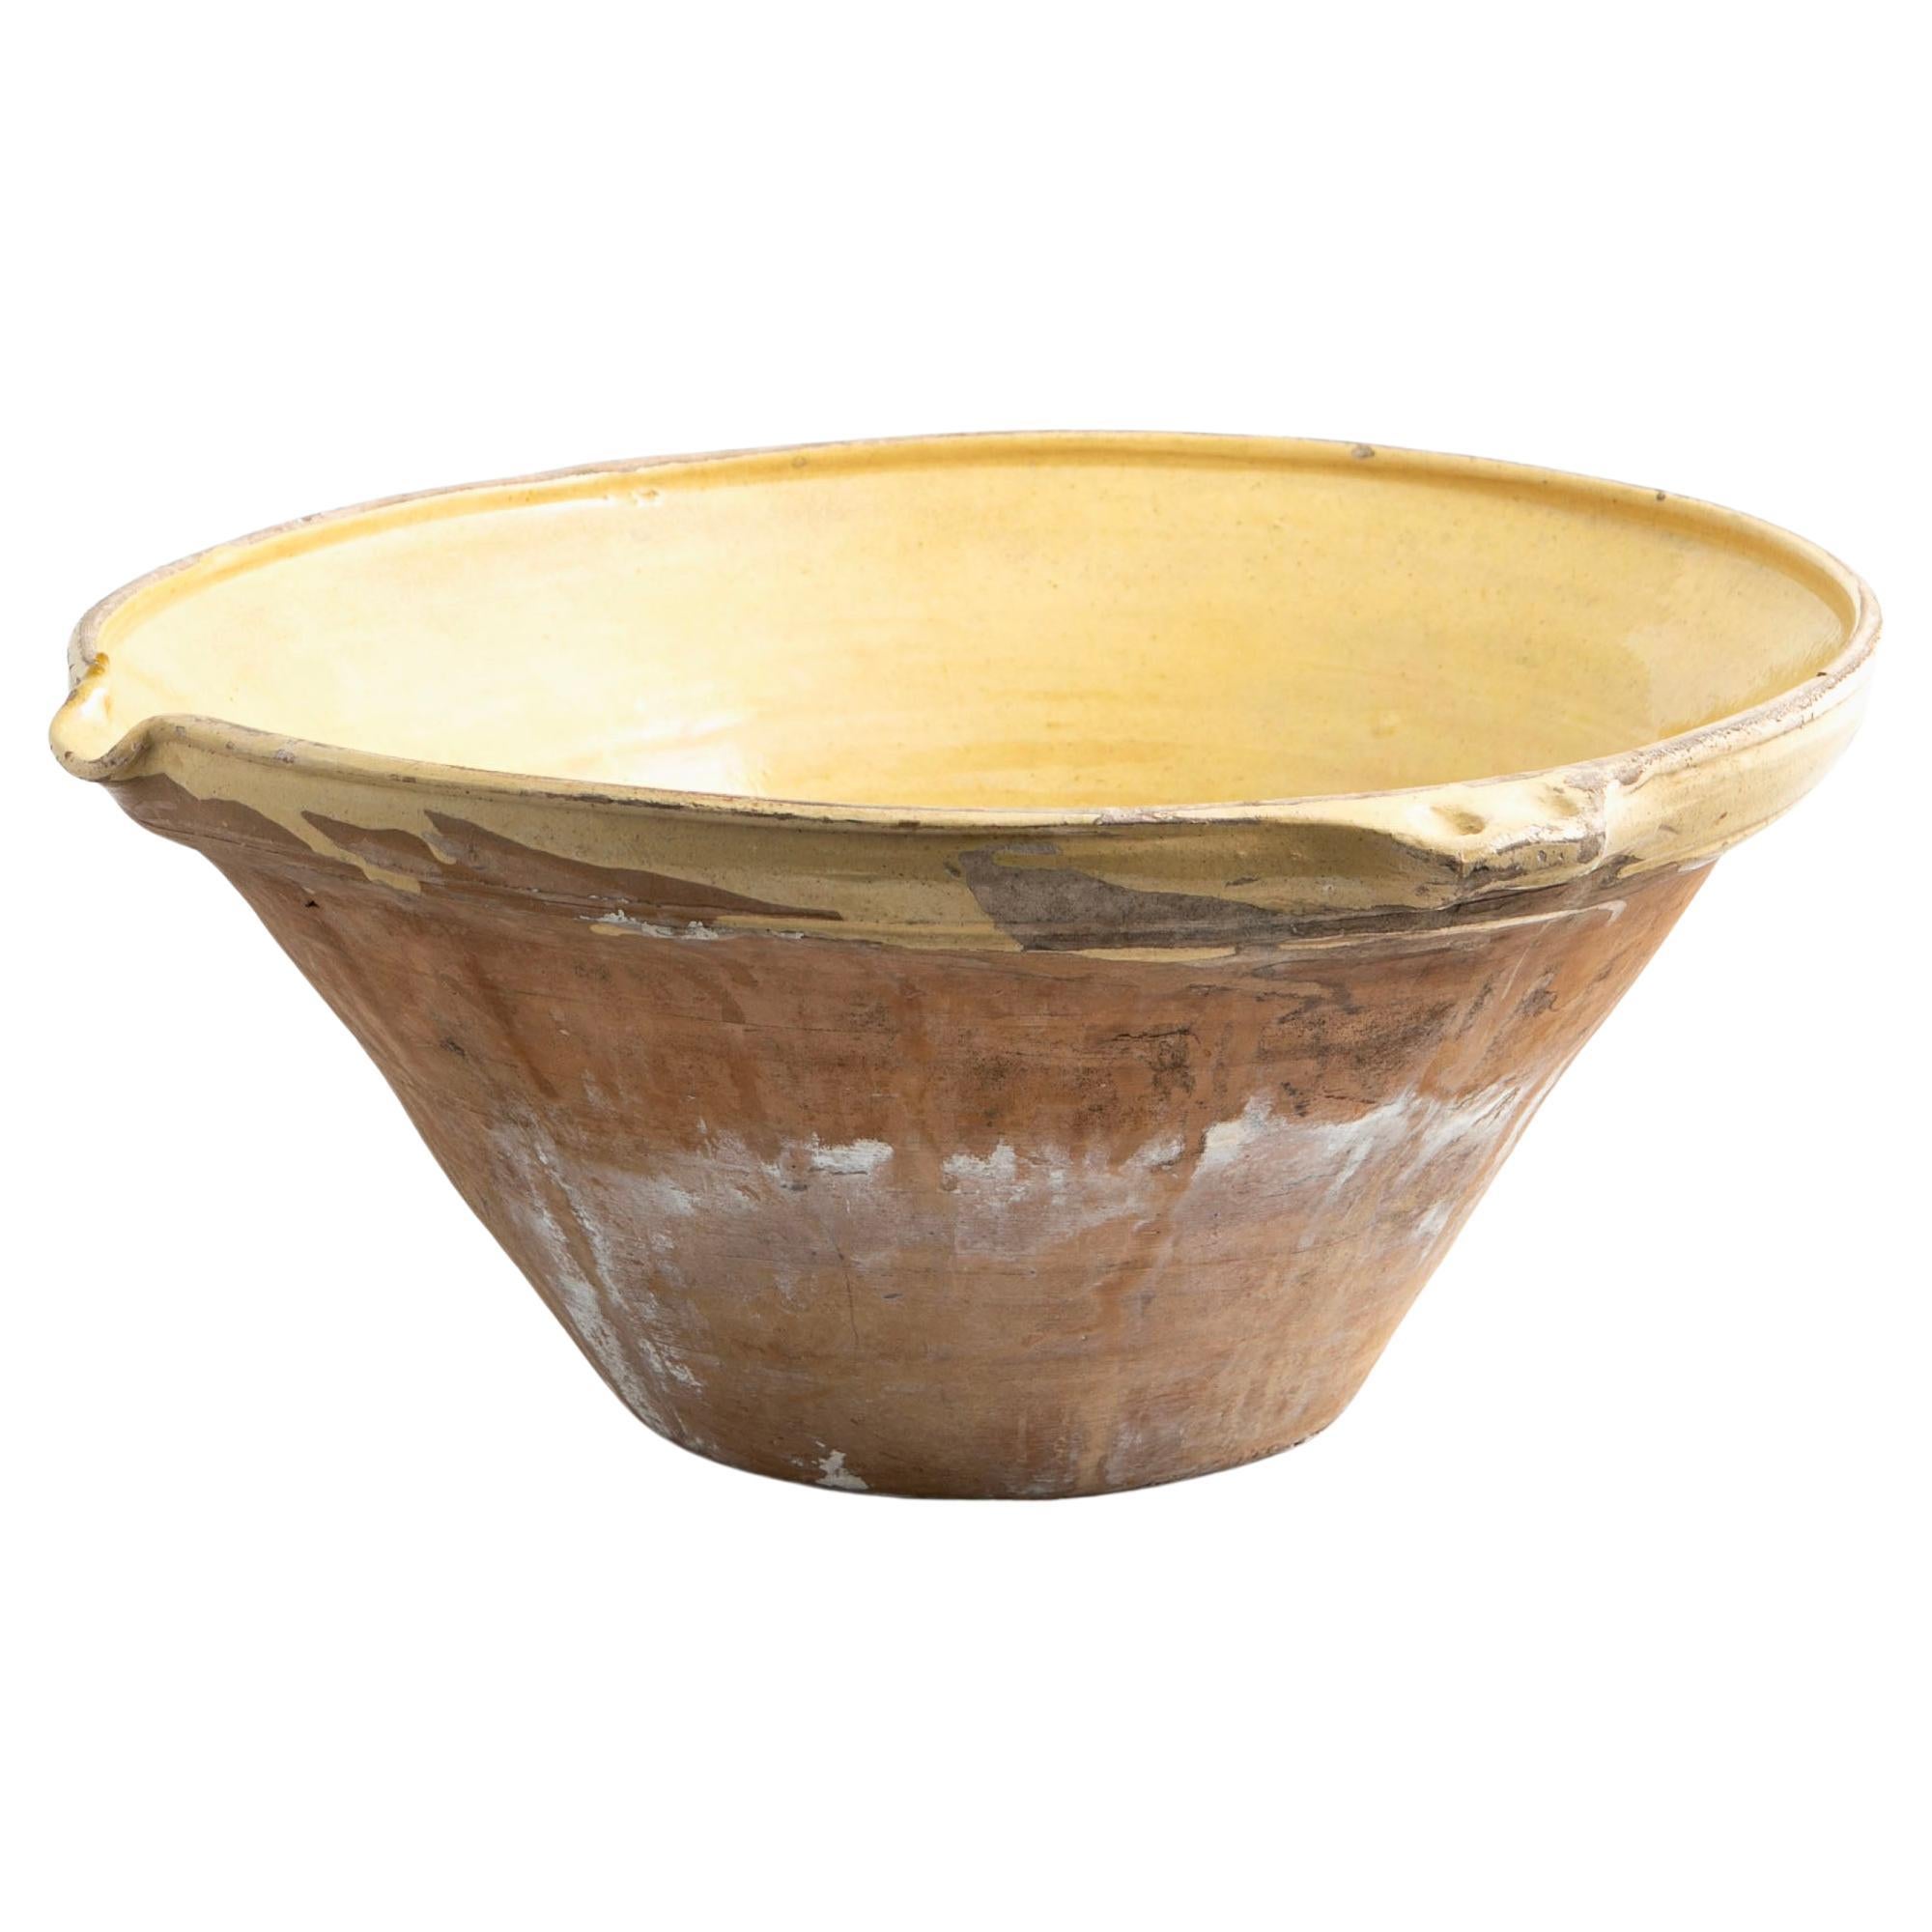 Large French Bowl 'Tian' with Yellow Glaze, 19th Century For Sale